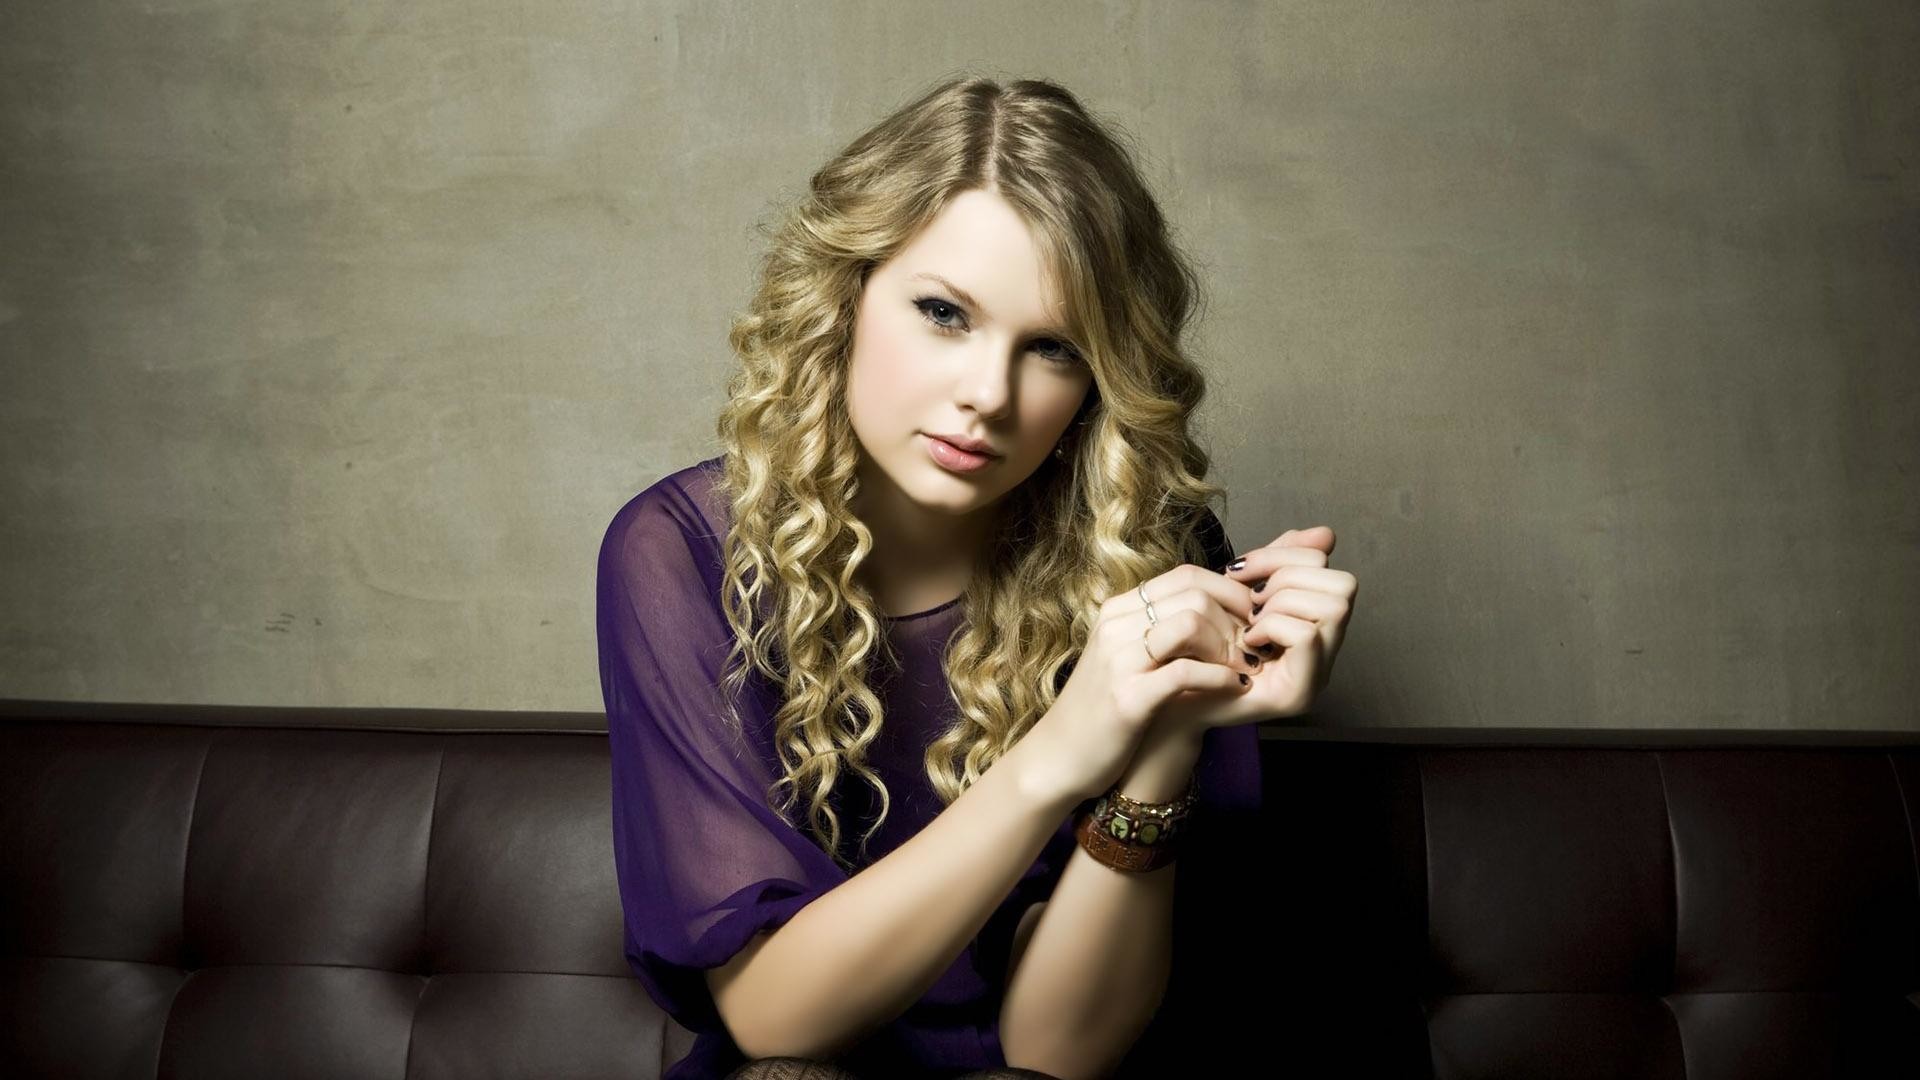 1920x1080 ... Download Famous American Singer Taylor Swift Wallpapers ...